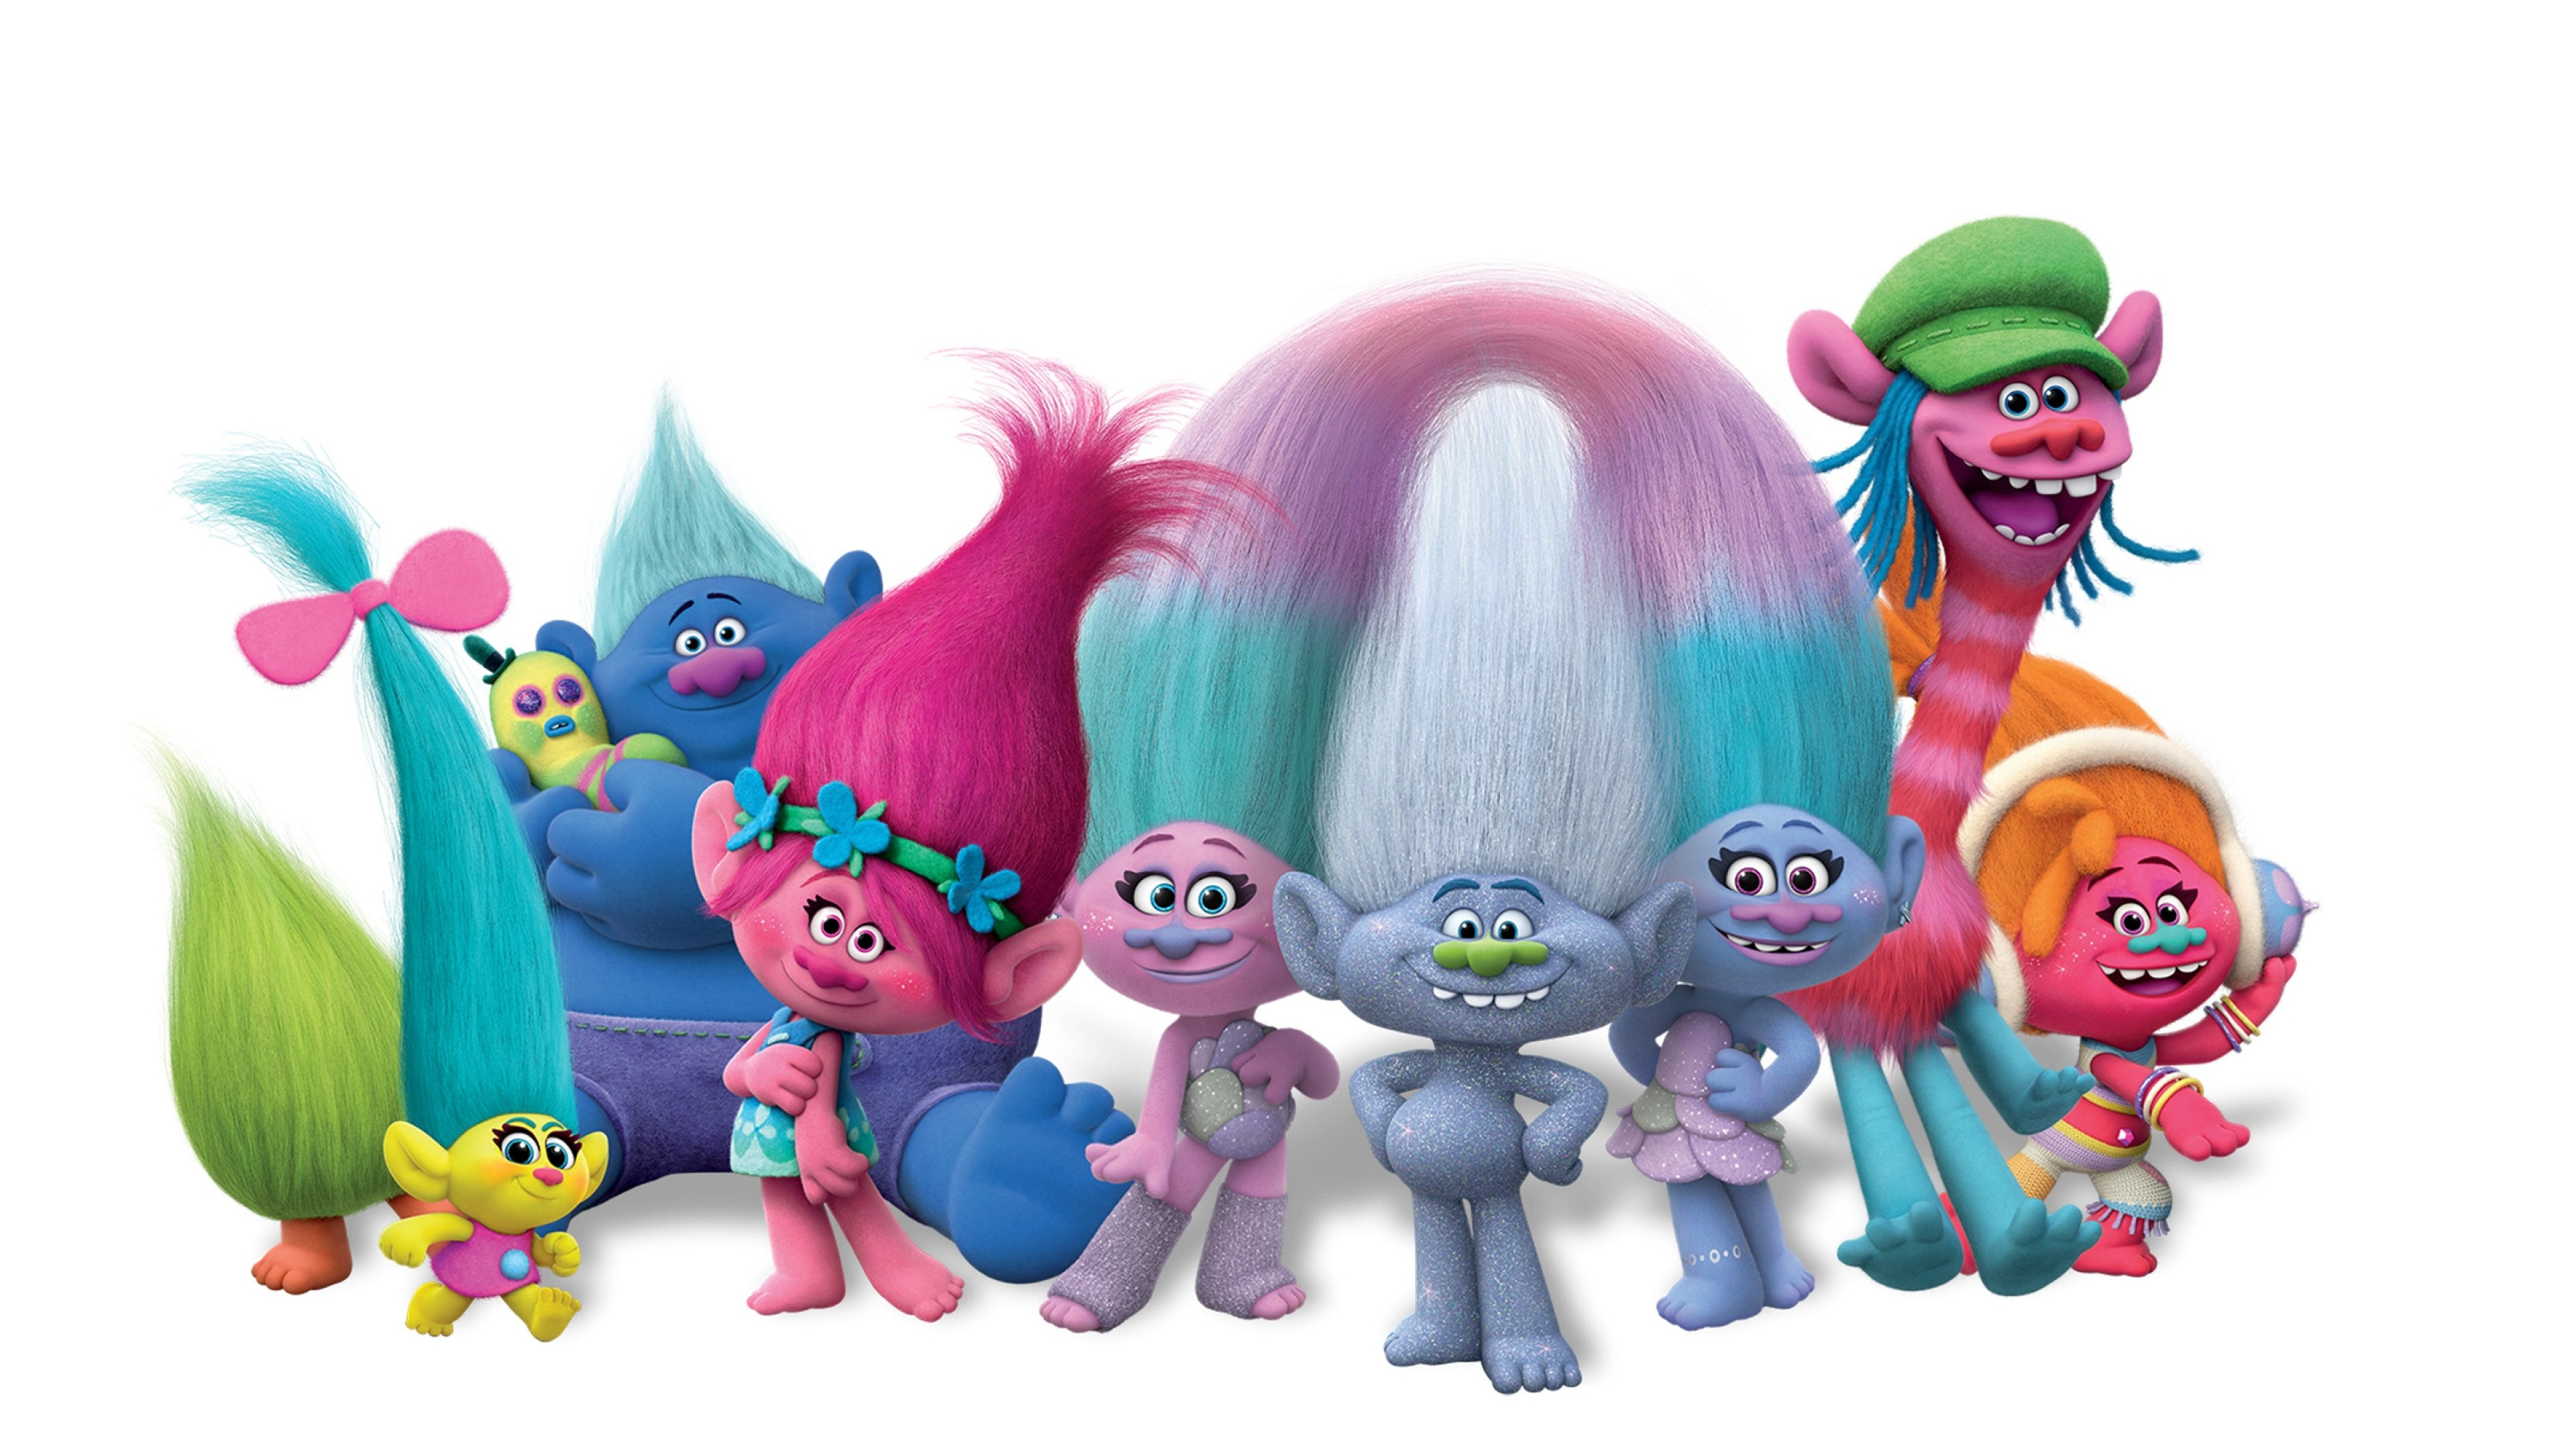 DreamWorks: Trolls, DWA, A subsidiary of Universal Pictures. 3840x2160 4K Background.